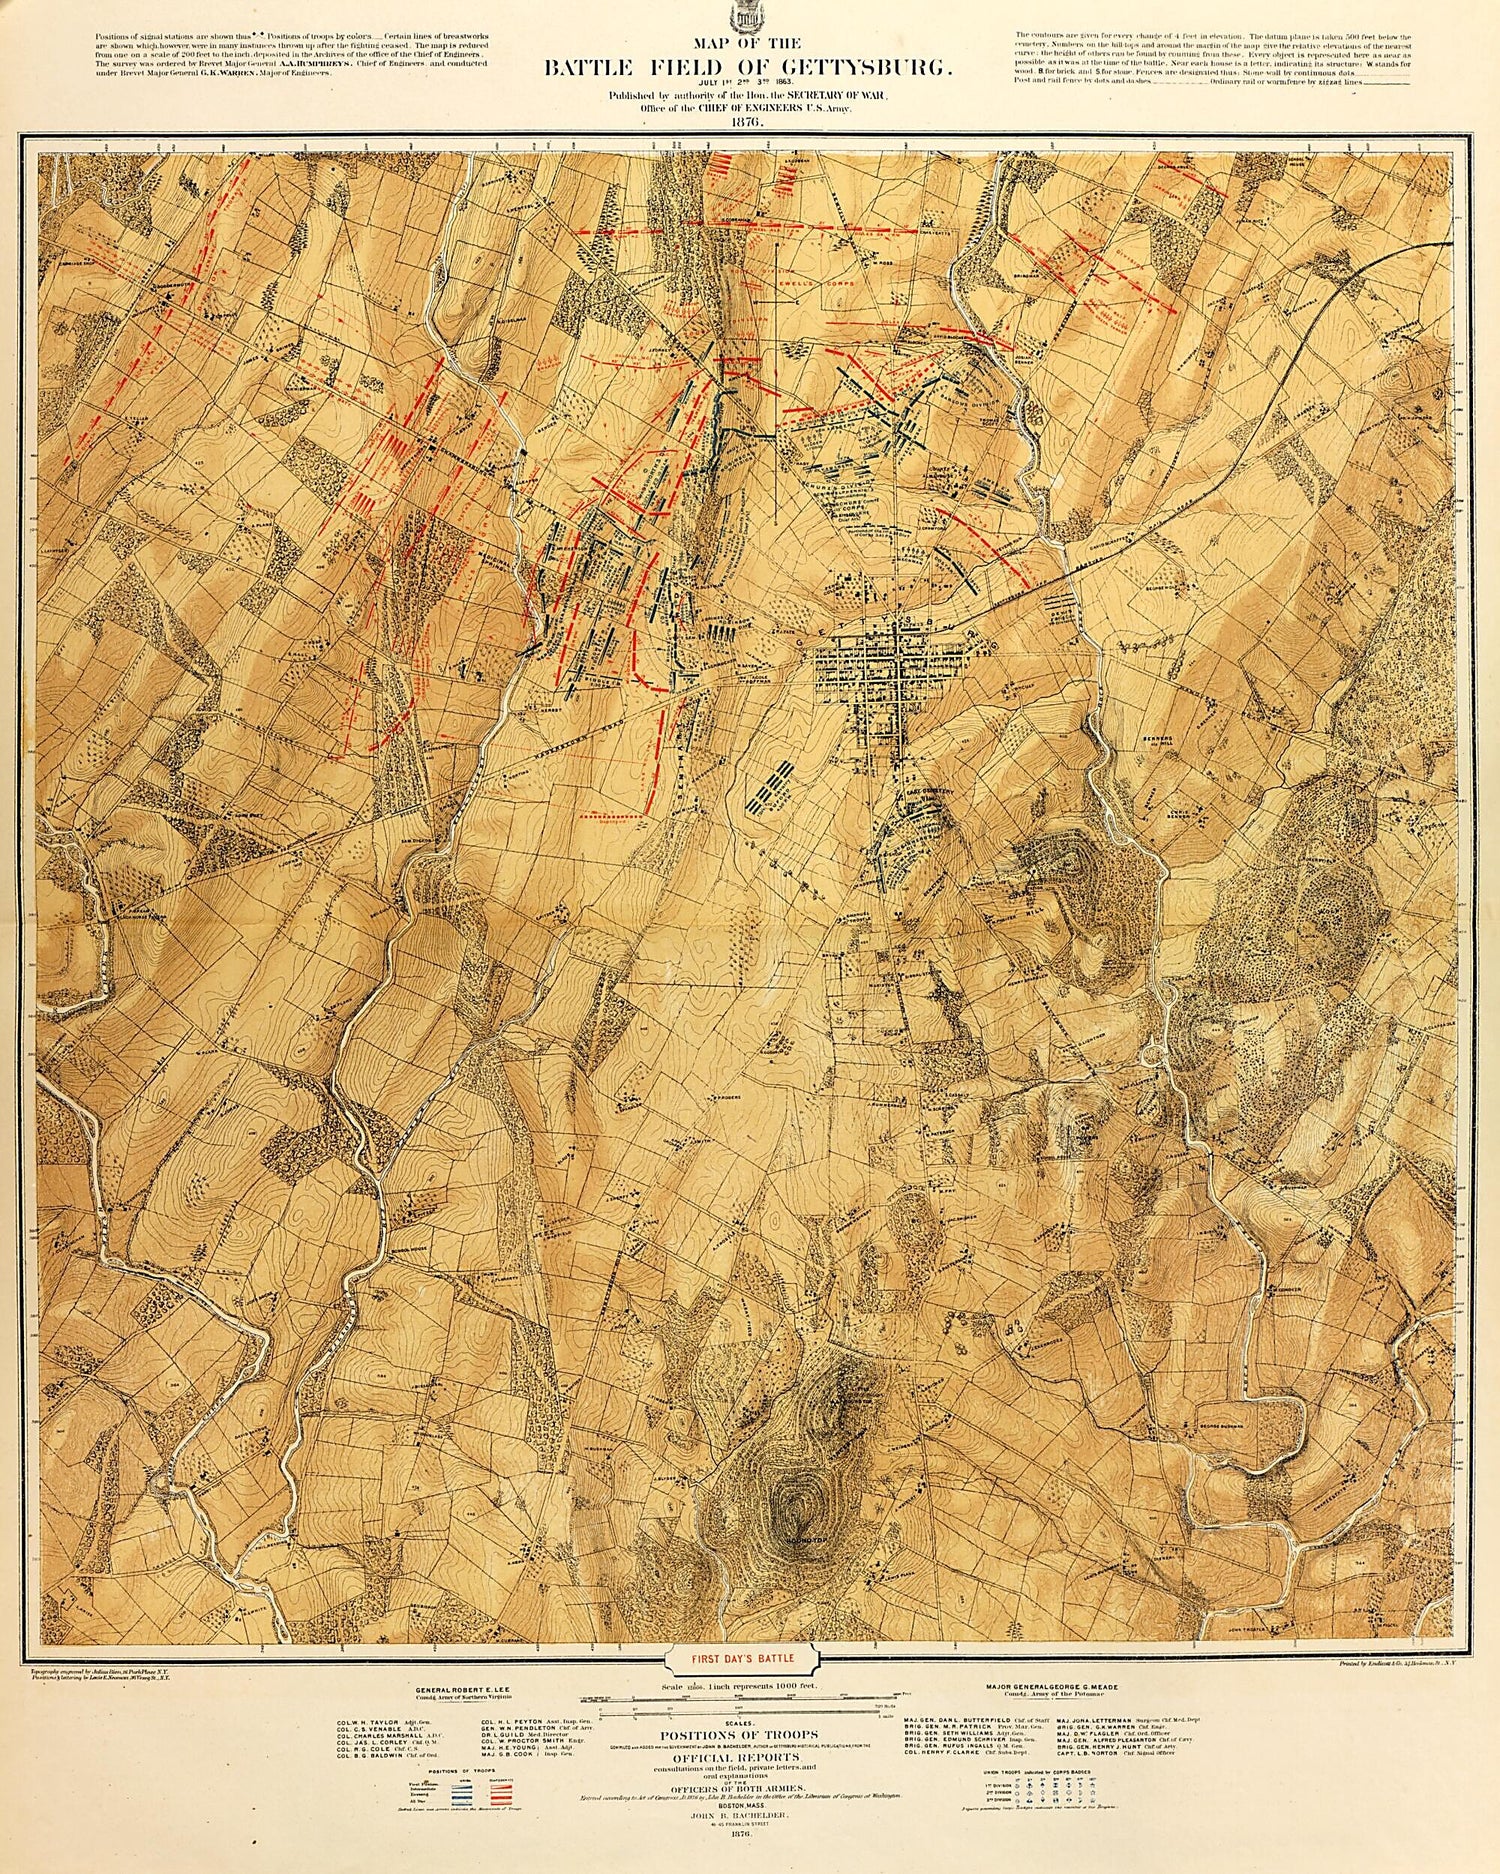 This old map of Map of the Battle Field of Gettysburg, First Day&